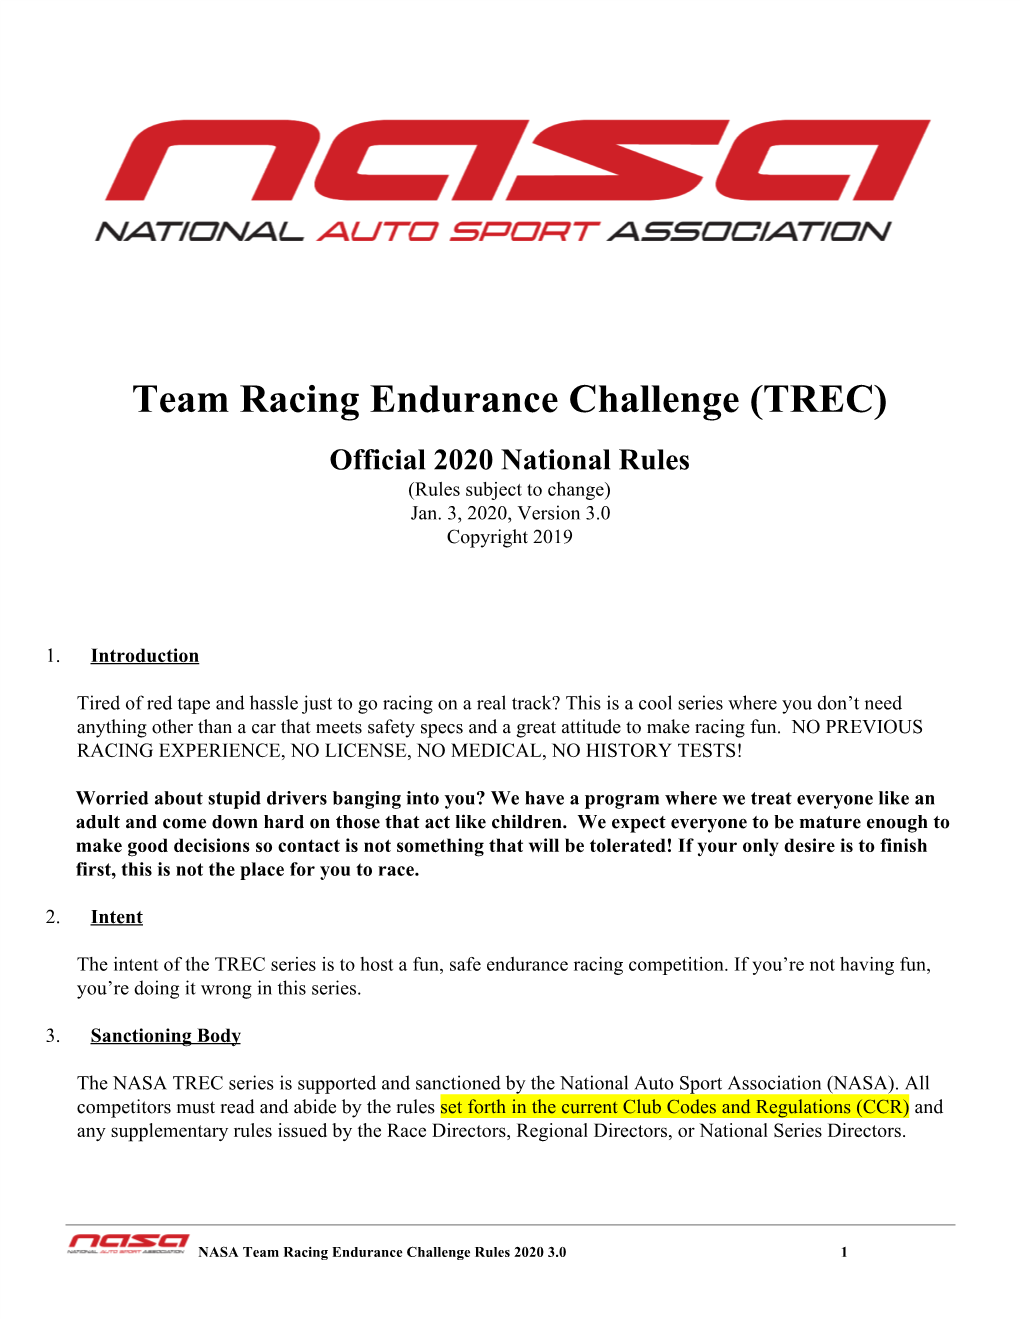 Team Racing Endurance Challenge (TREC) Official 2020 National Rules (Rules Subject to Change) Jan